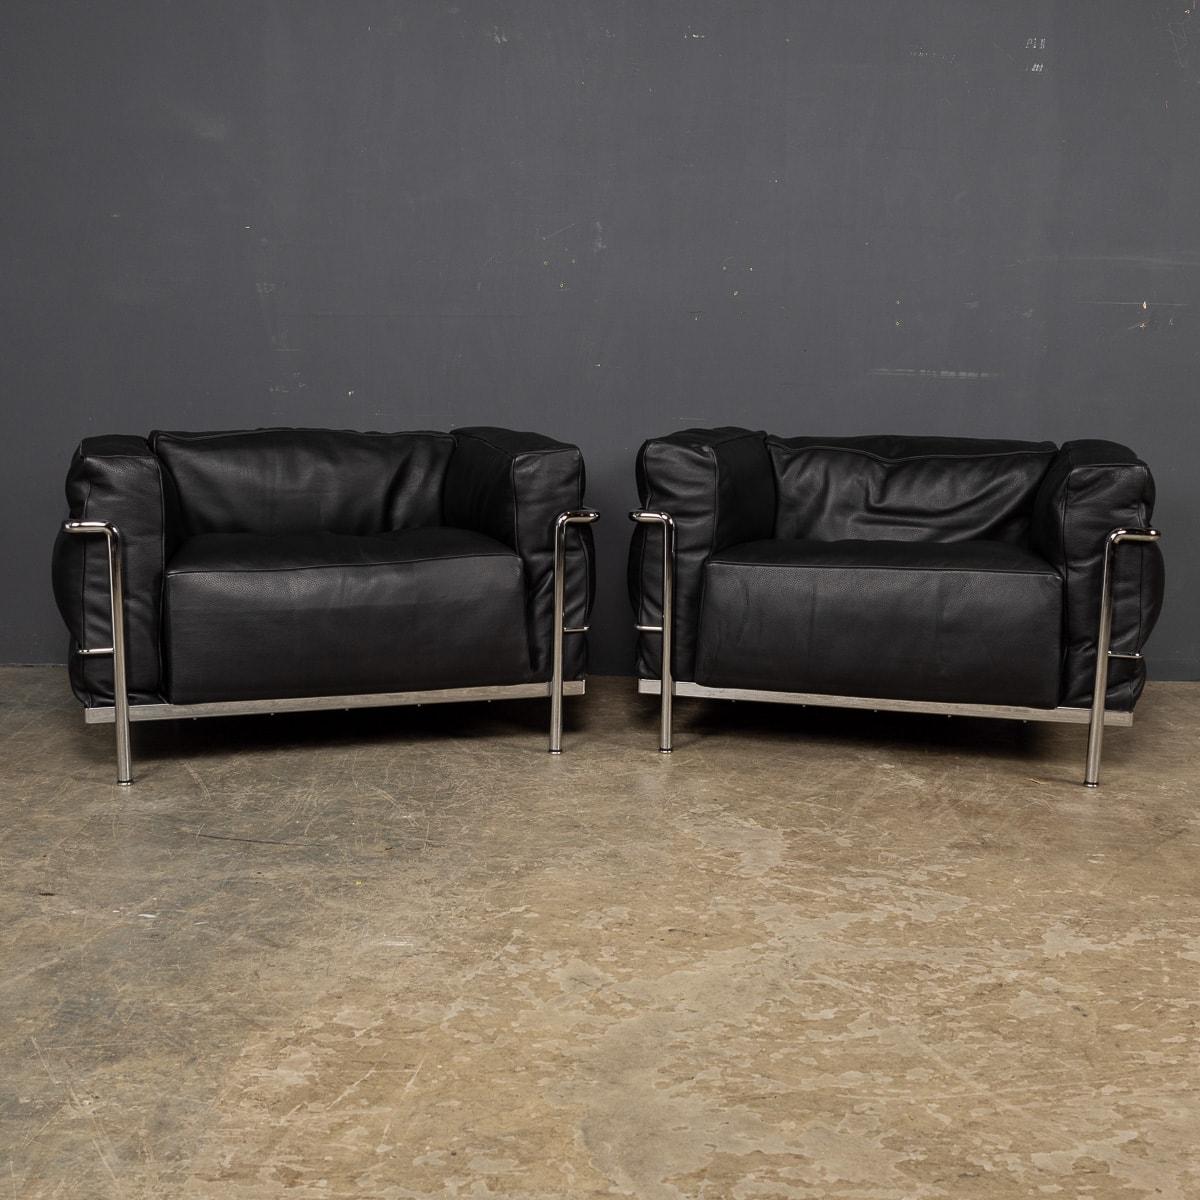 A pair of 3 Fauteuil Grand Confort Grand Modèle Durable Cassina Armchairs. By Le Corbusier, designed by Pierre Jeanneret, Charlotte Perriand for Cassina is an iconic armchair with metal structure, available in a beautiful metal finish and leather